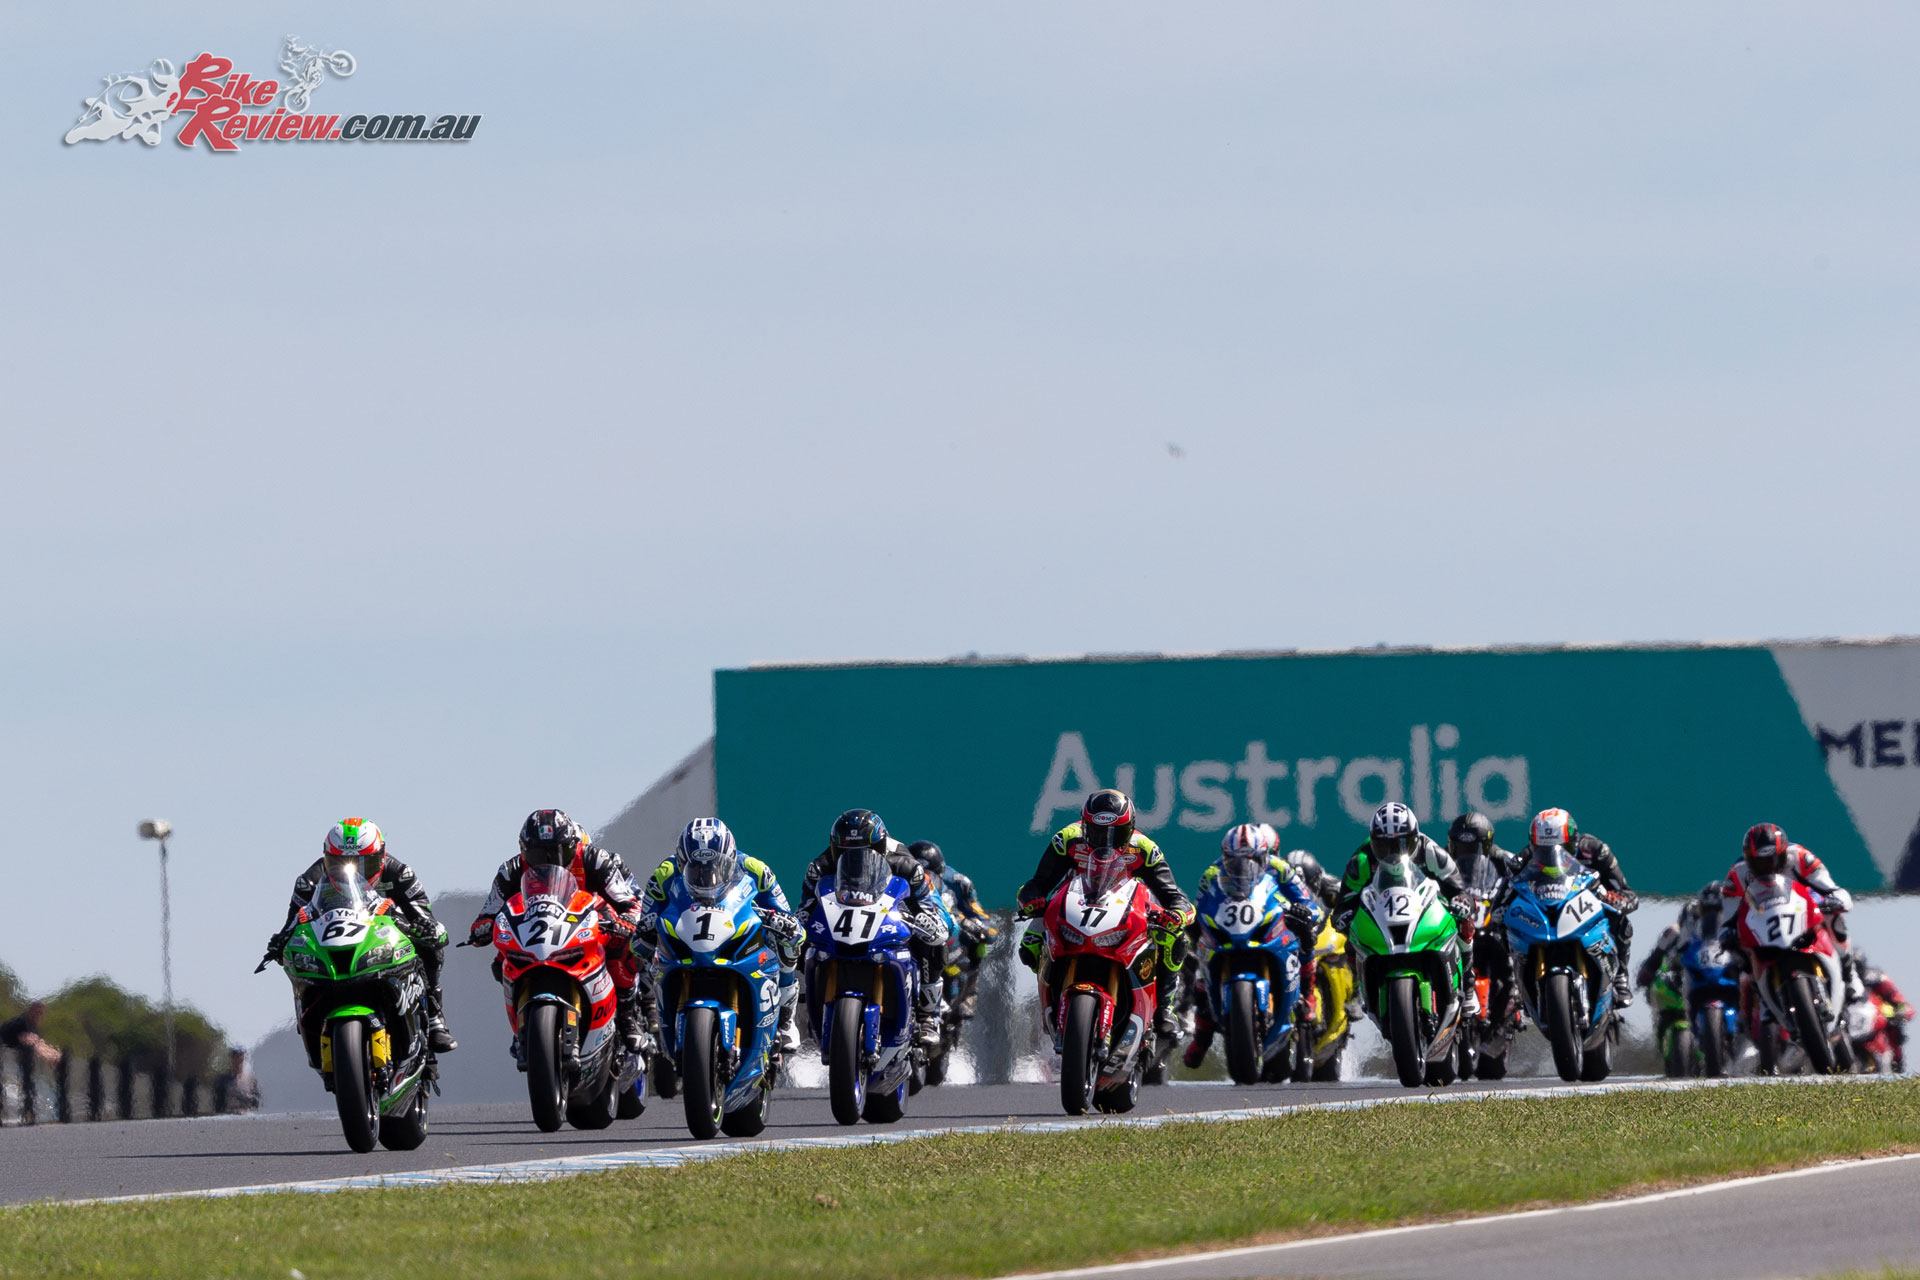 ASBK returns in 2019 with the calendar just announced